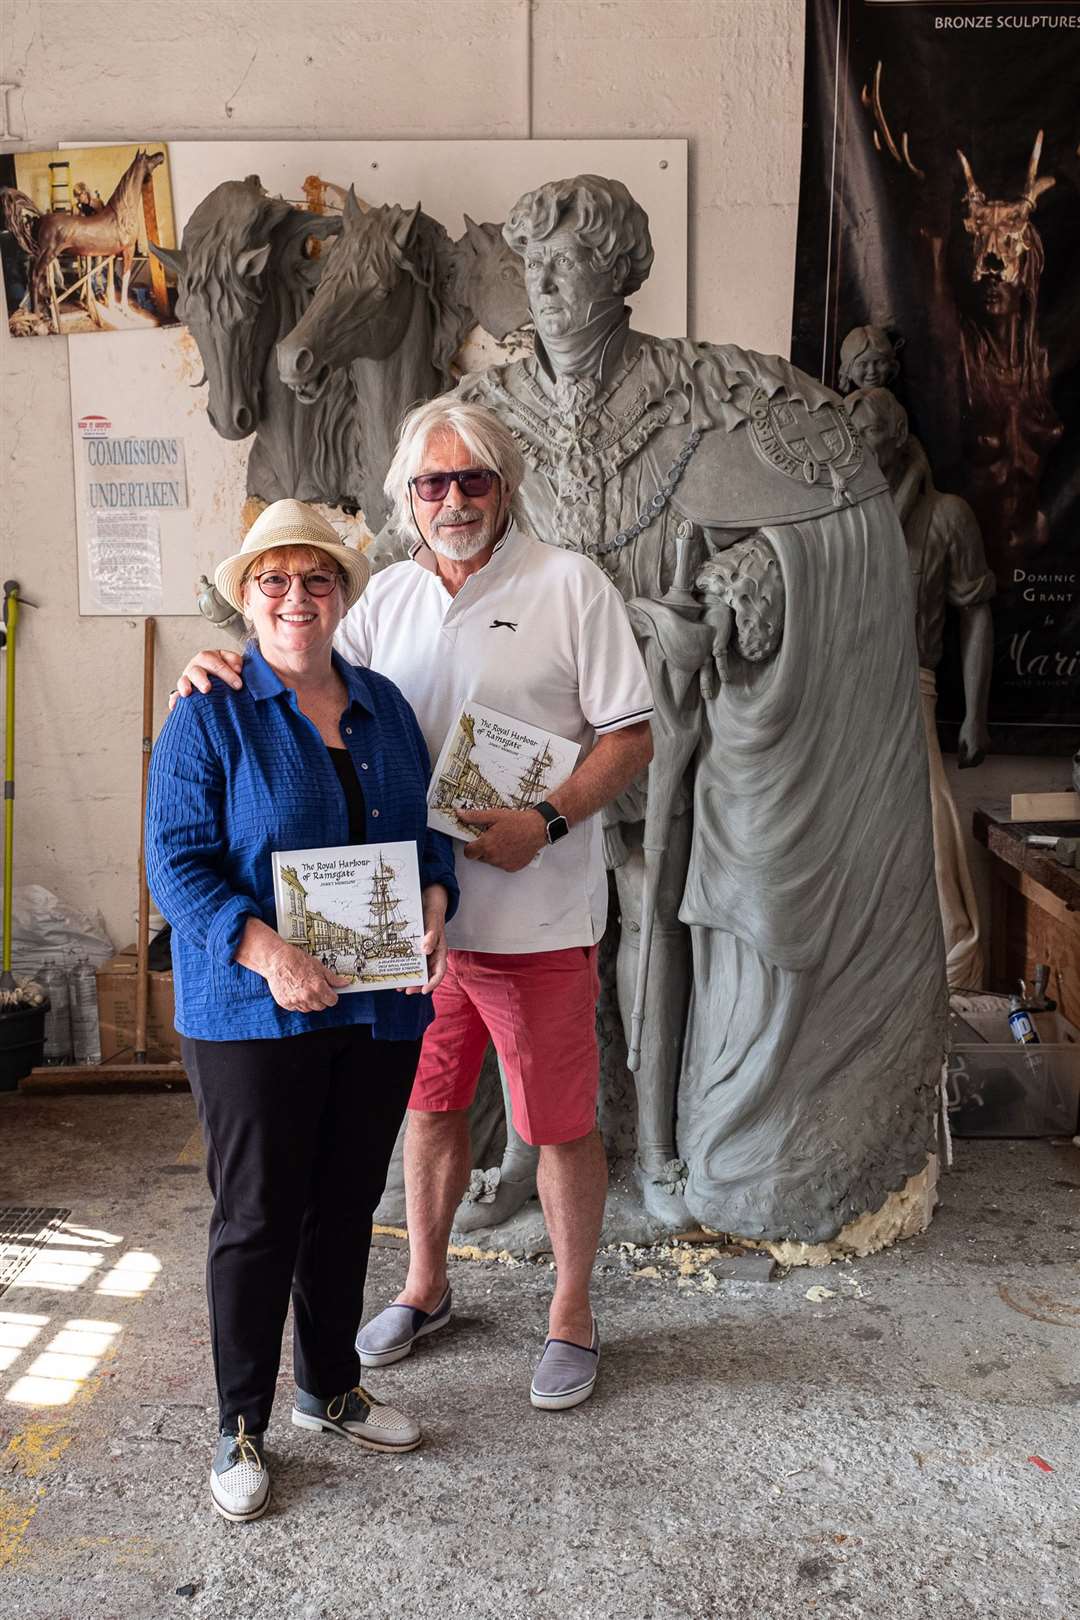 Actress Brenda Blethyn is supporting the appeal and has donated towards its completion to mark the 200th anniversary of the naming of the town as a Royal Harbour. She is pictured with the statue's creator Dominic Grant. Picture: Royal Harbour 200th Anniversary Festival